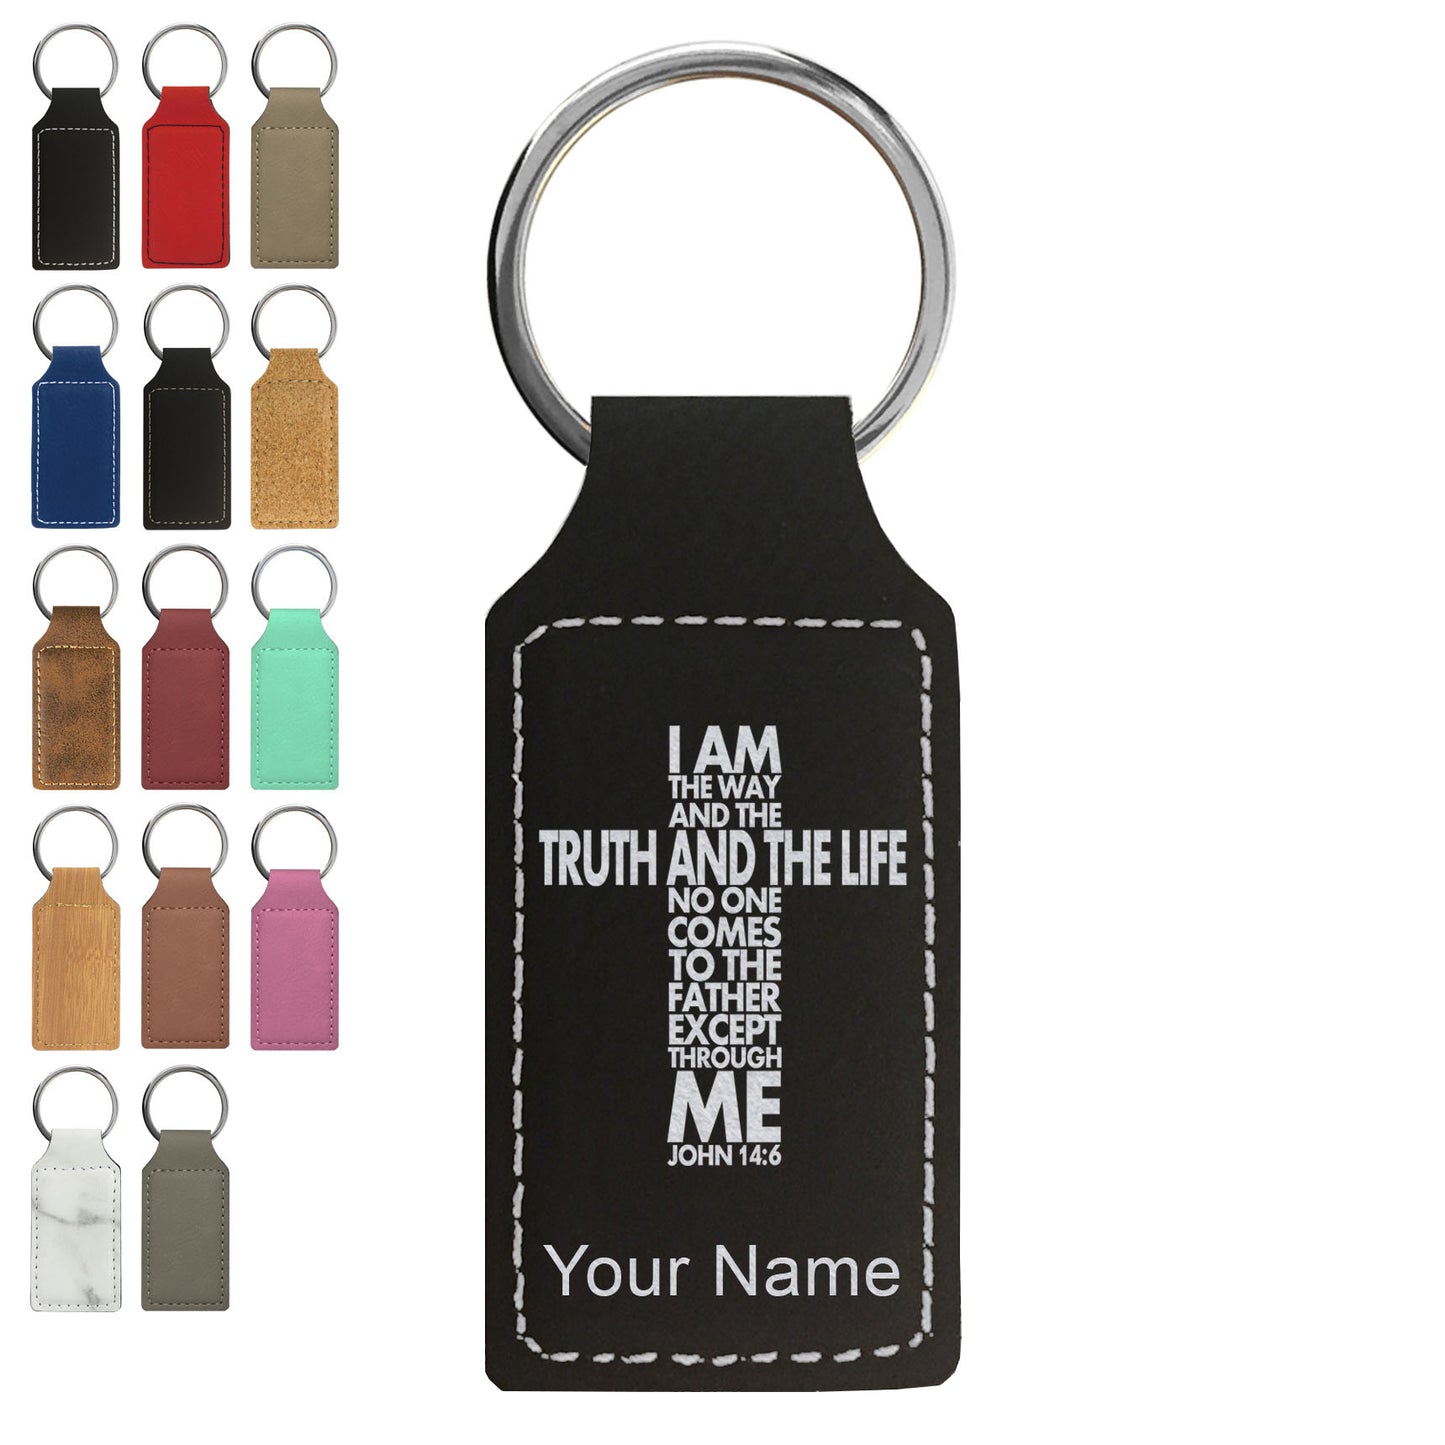 Faux Leather Rectangle Keychain, Bible Verse John 14-6, Personalized Engraving Included